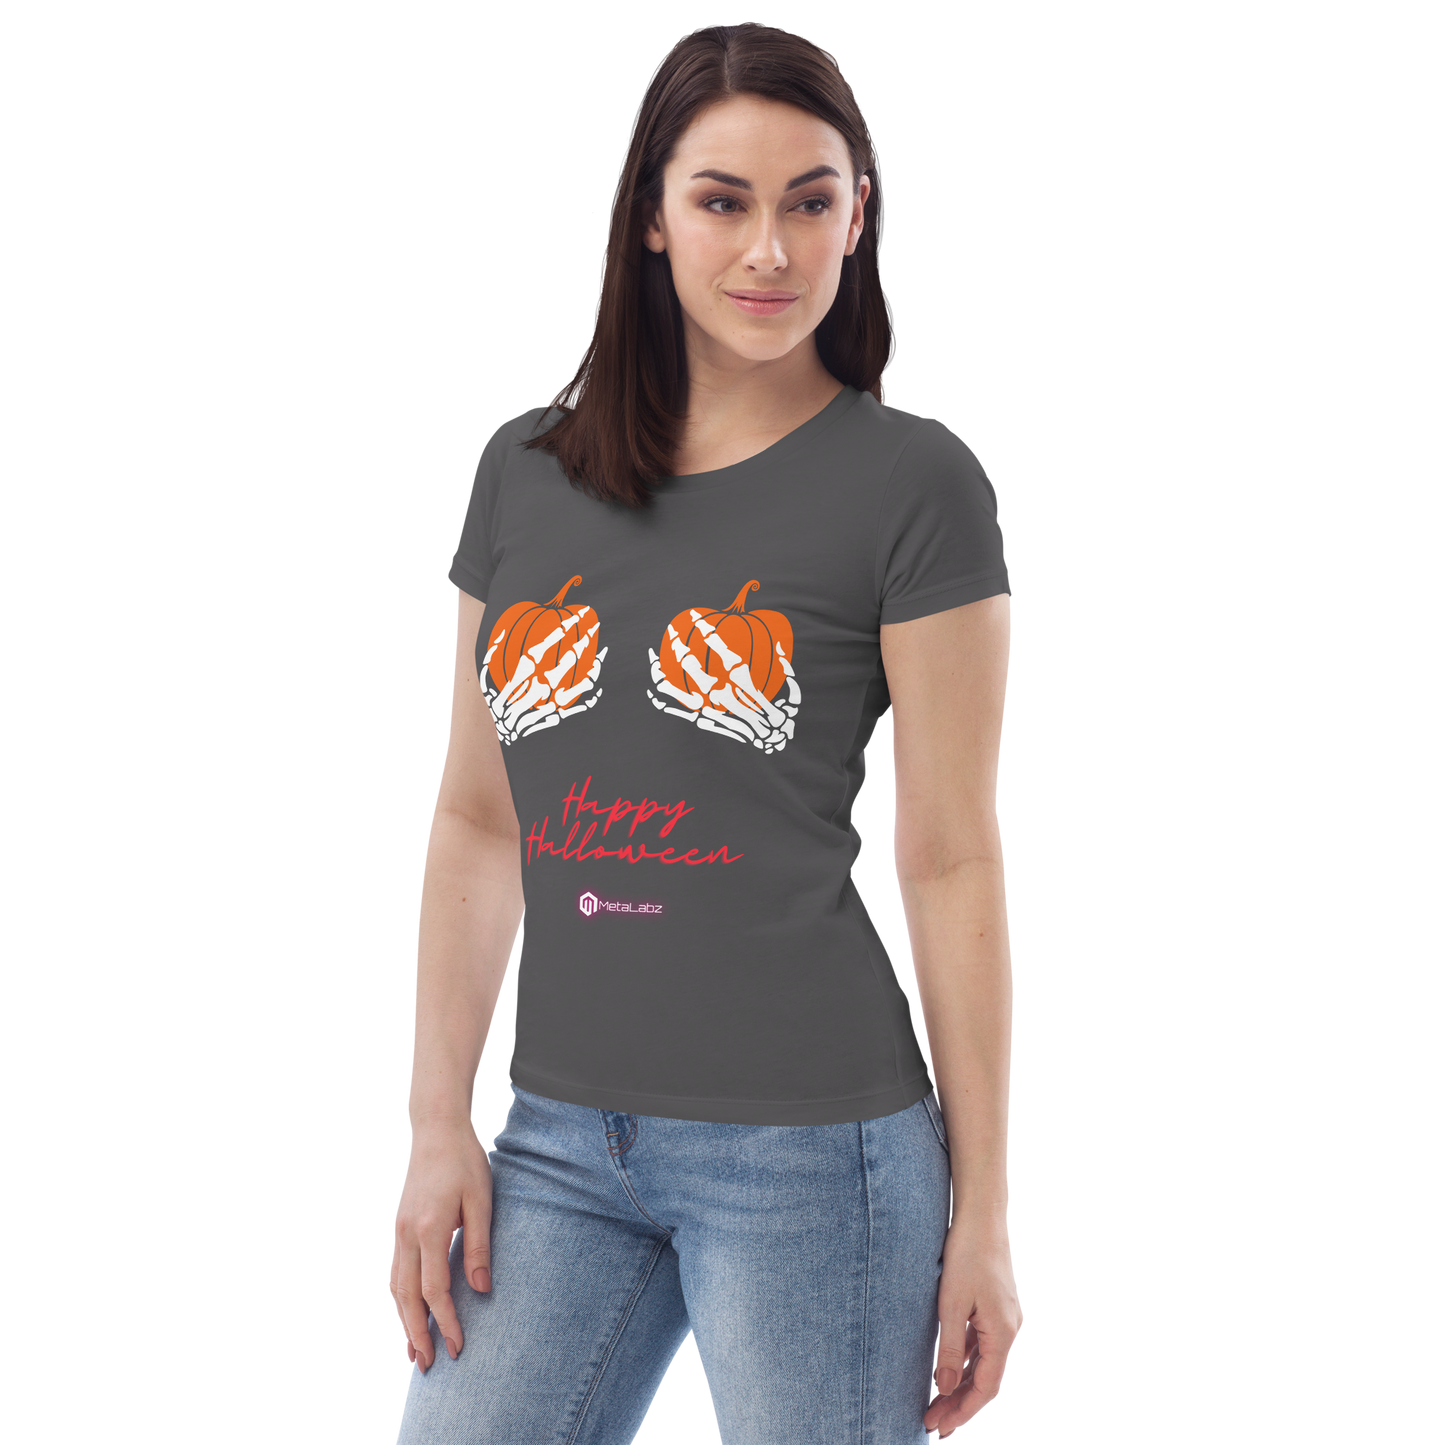 Women's fitted eco tee Halloween edition